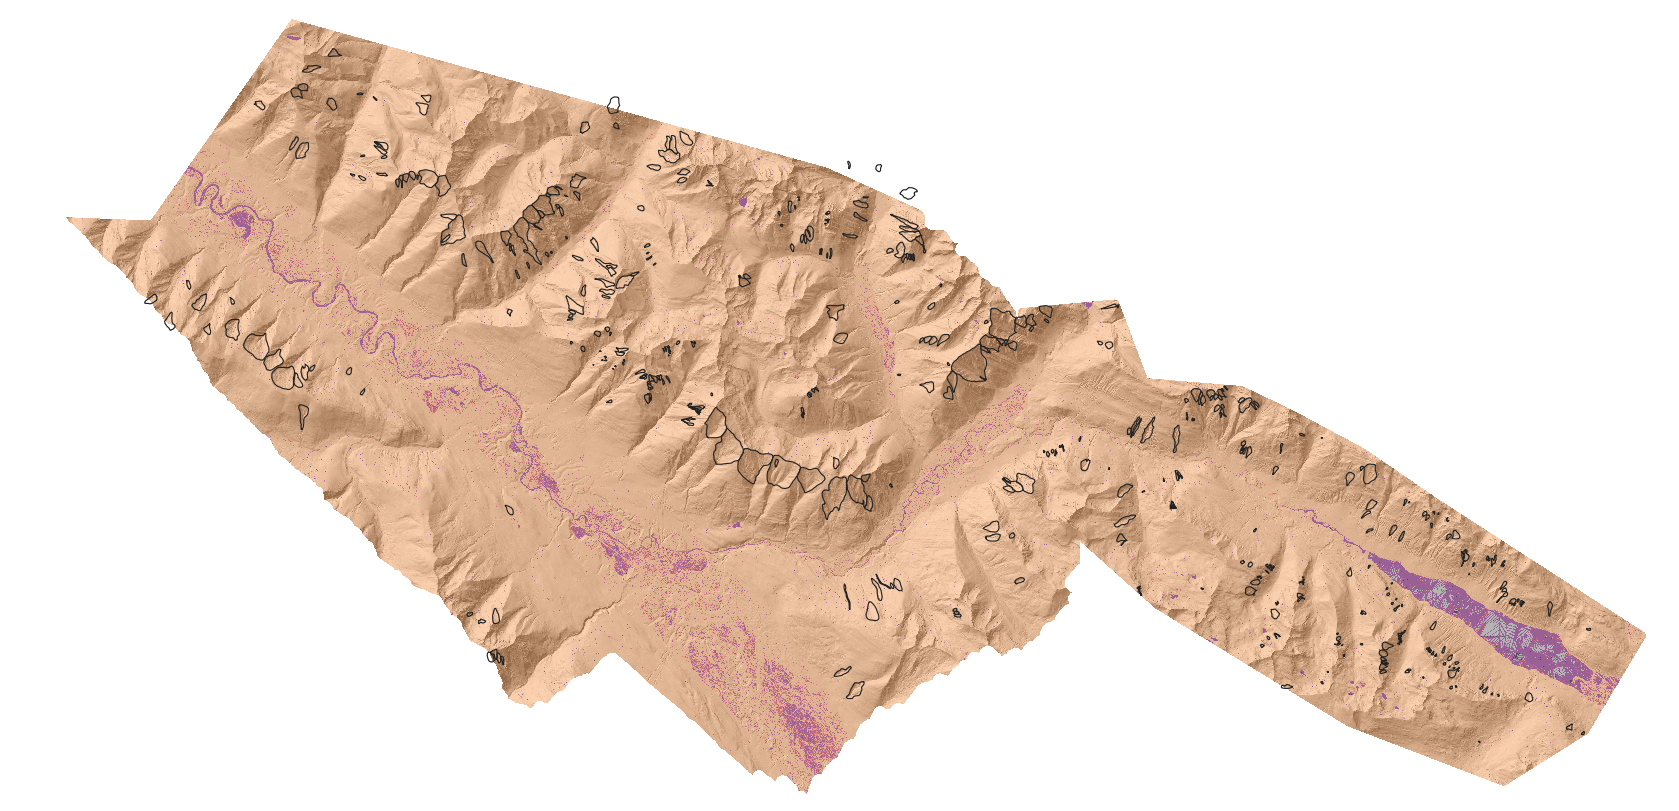 ../../_images/STUDENTSPROJECTS_Proj_2022_Matera_Modeling_debris_flow_source_areas_Txomin_Bornaetxea_107_0.png